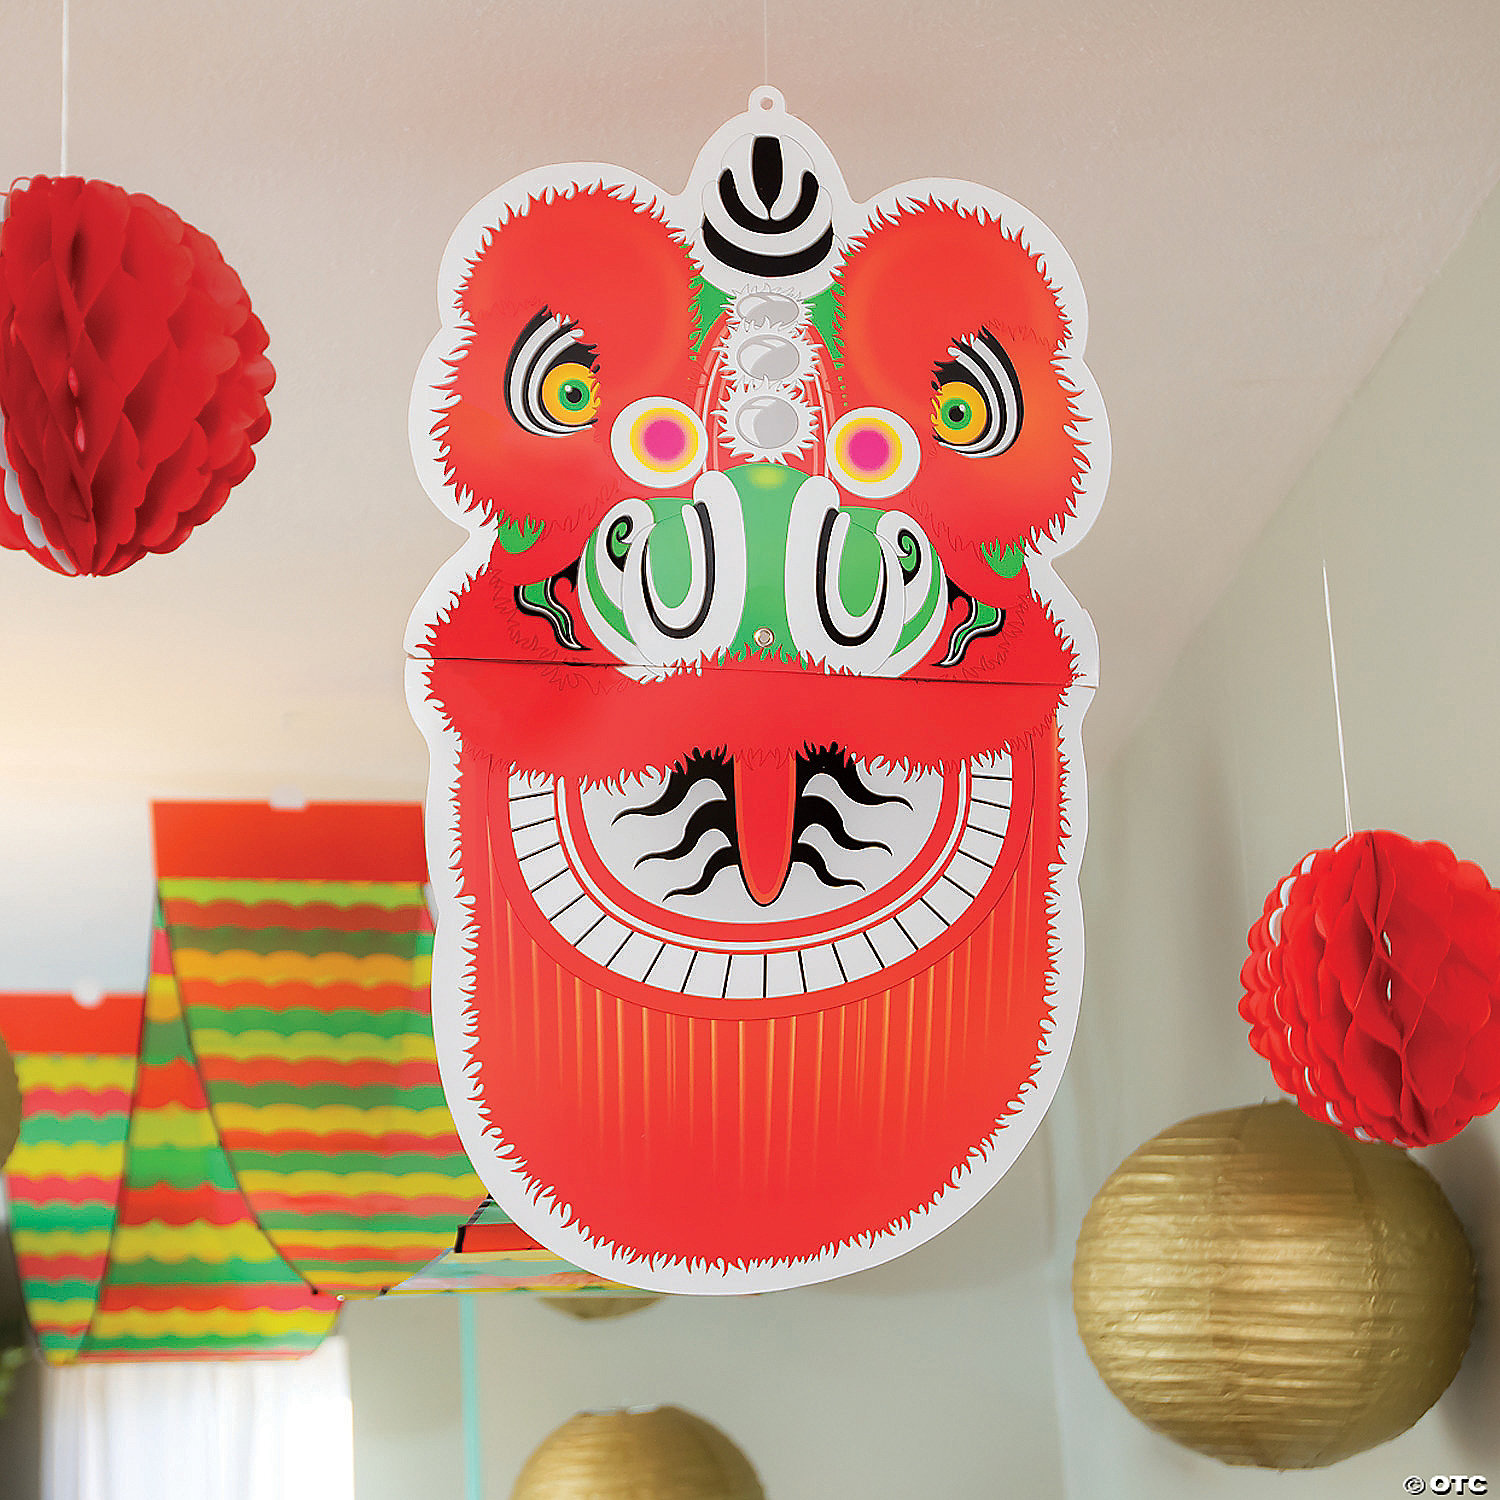 6.6 Feet Bememo 3D Chinese New Year Dragon Garland Hanging Decoration